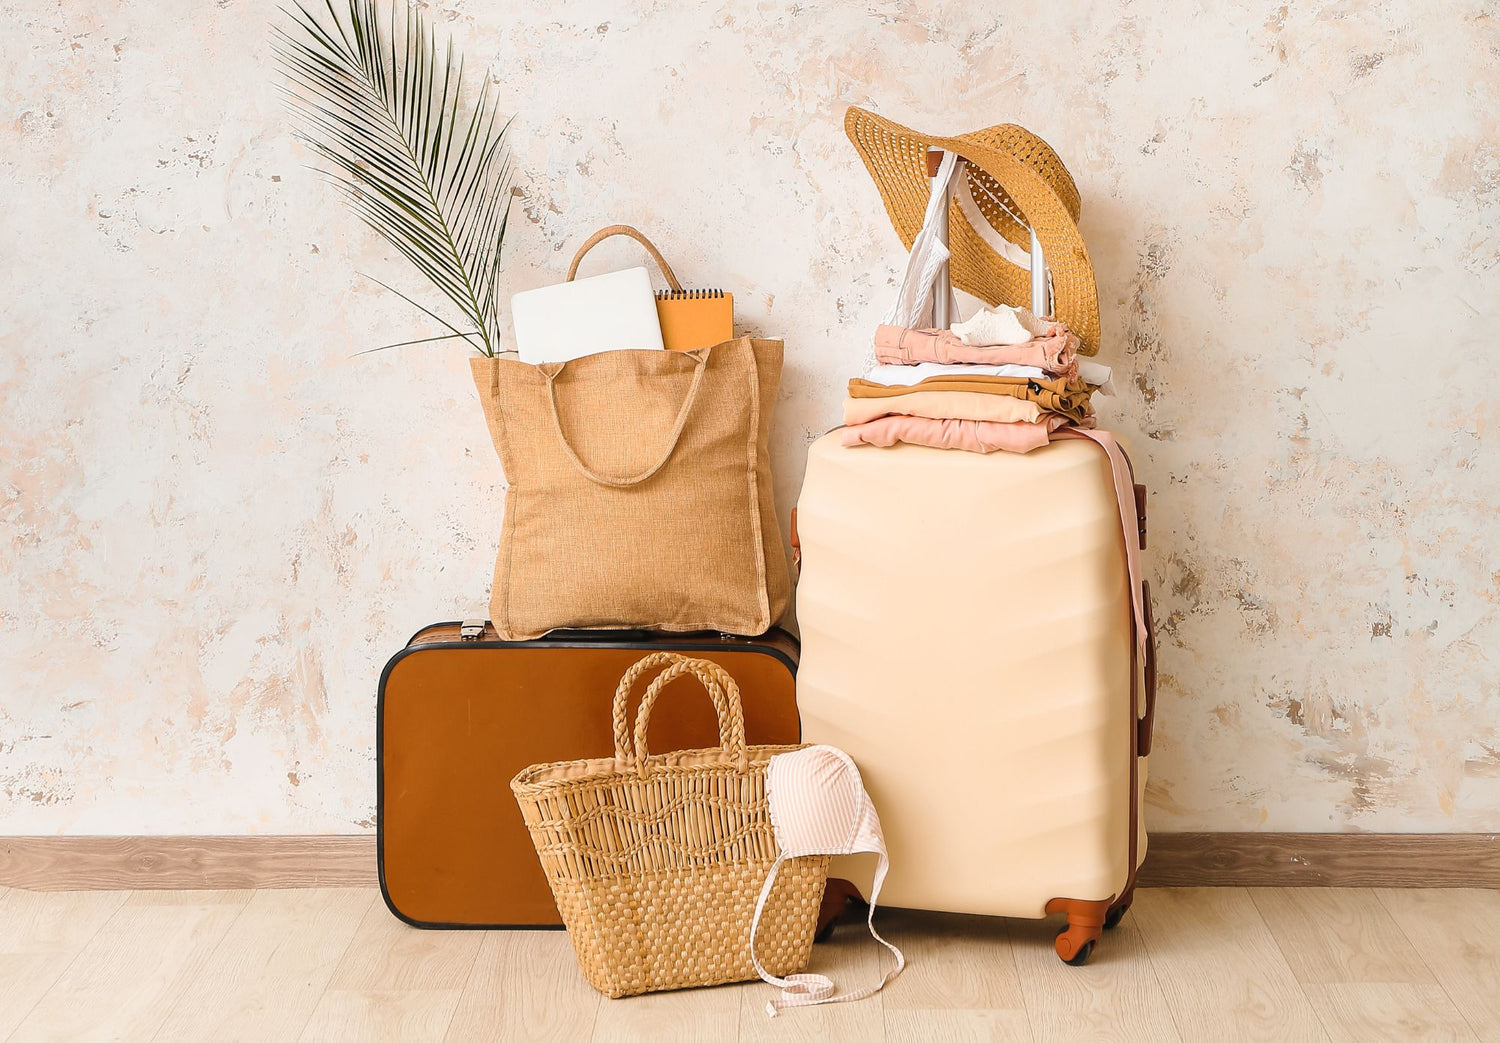 Traveling Light and Efficiently: A Guide to Summer Wanderlust